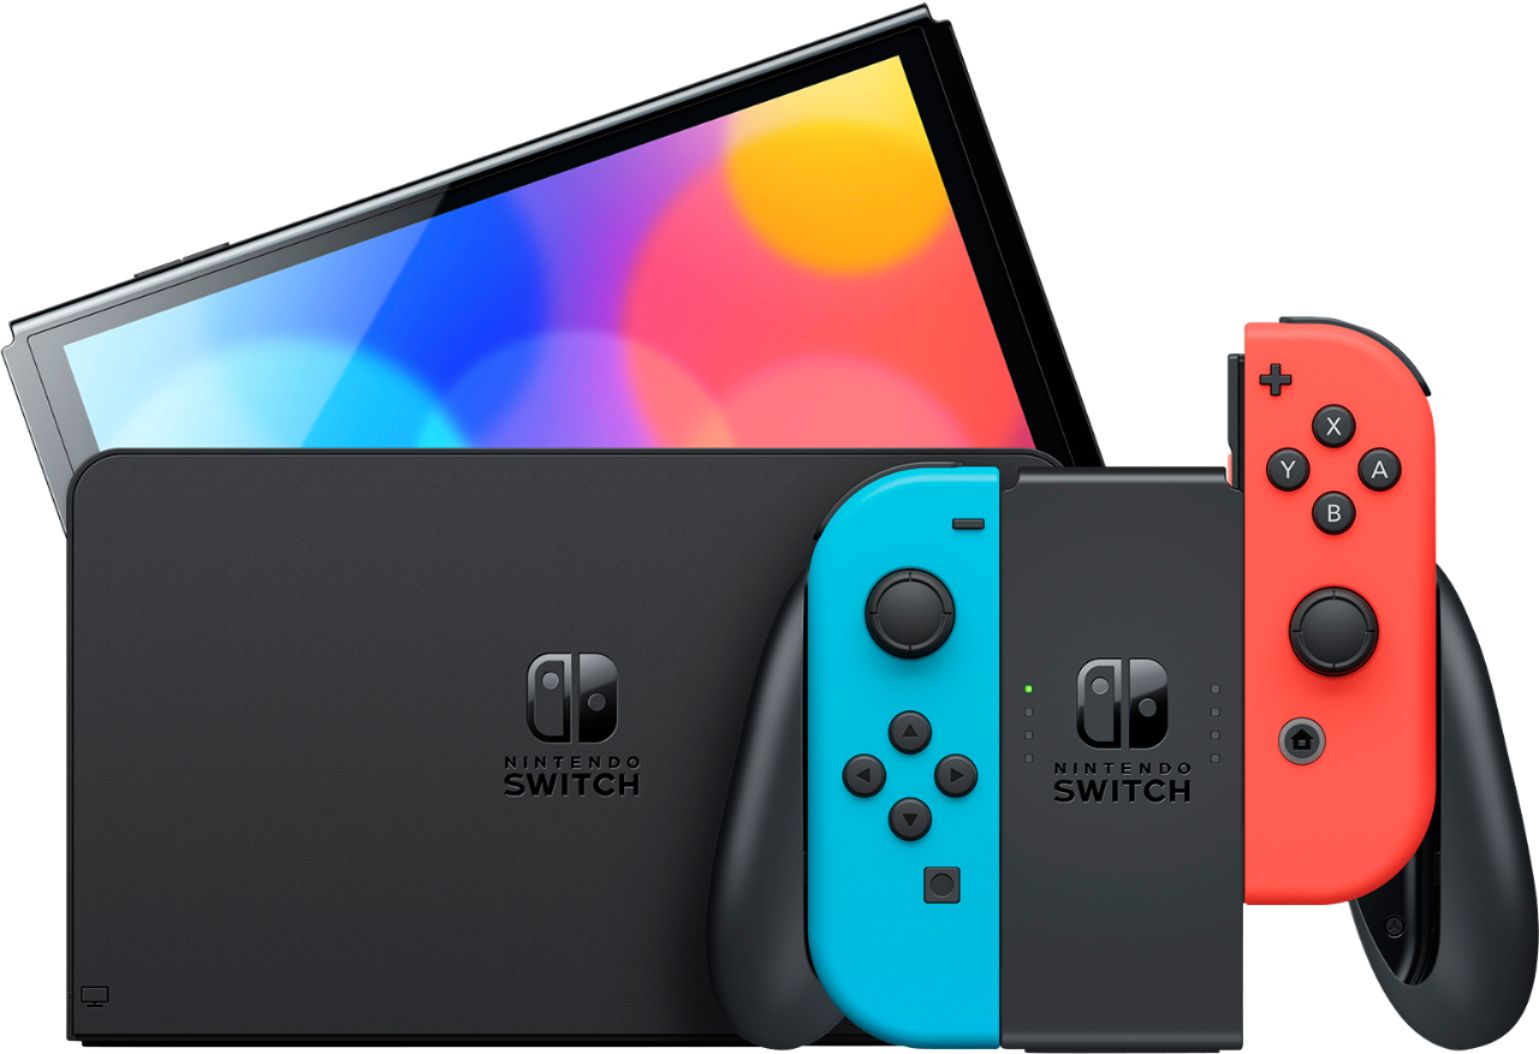 2022 New Nintendo Switch OLED Model Neon Red Blue with The Legend of Zelda: Skyward Sword HD and Mytrix Full Body Skin Sticker for NS OLED Console, Dock and Joycons - Sushi Set